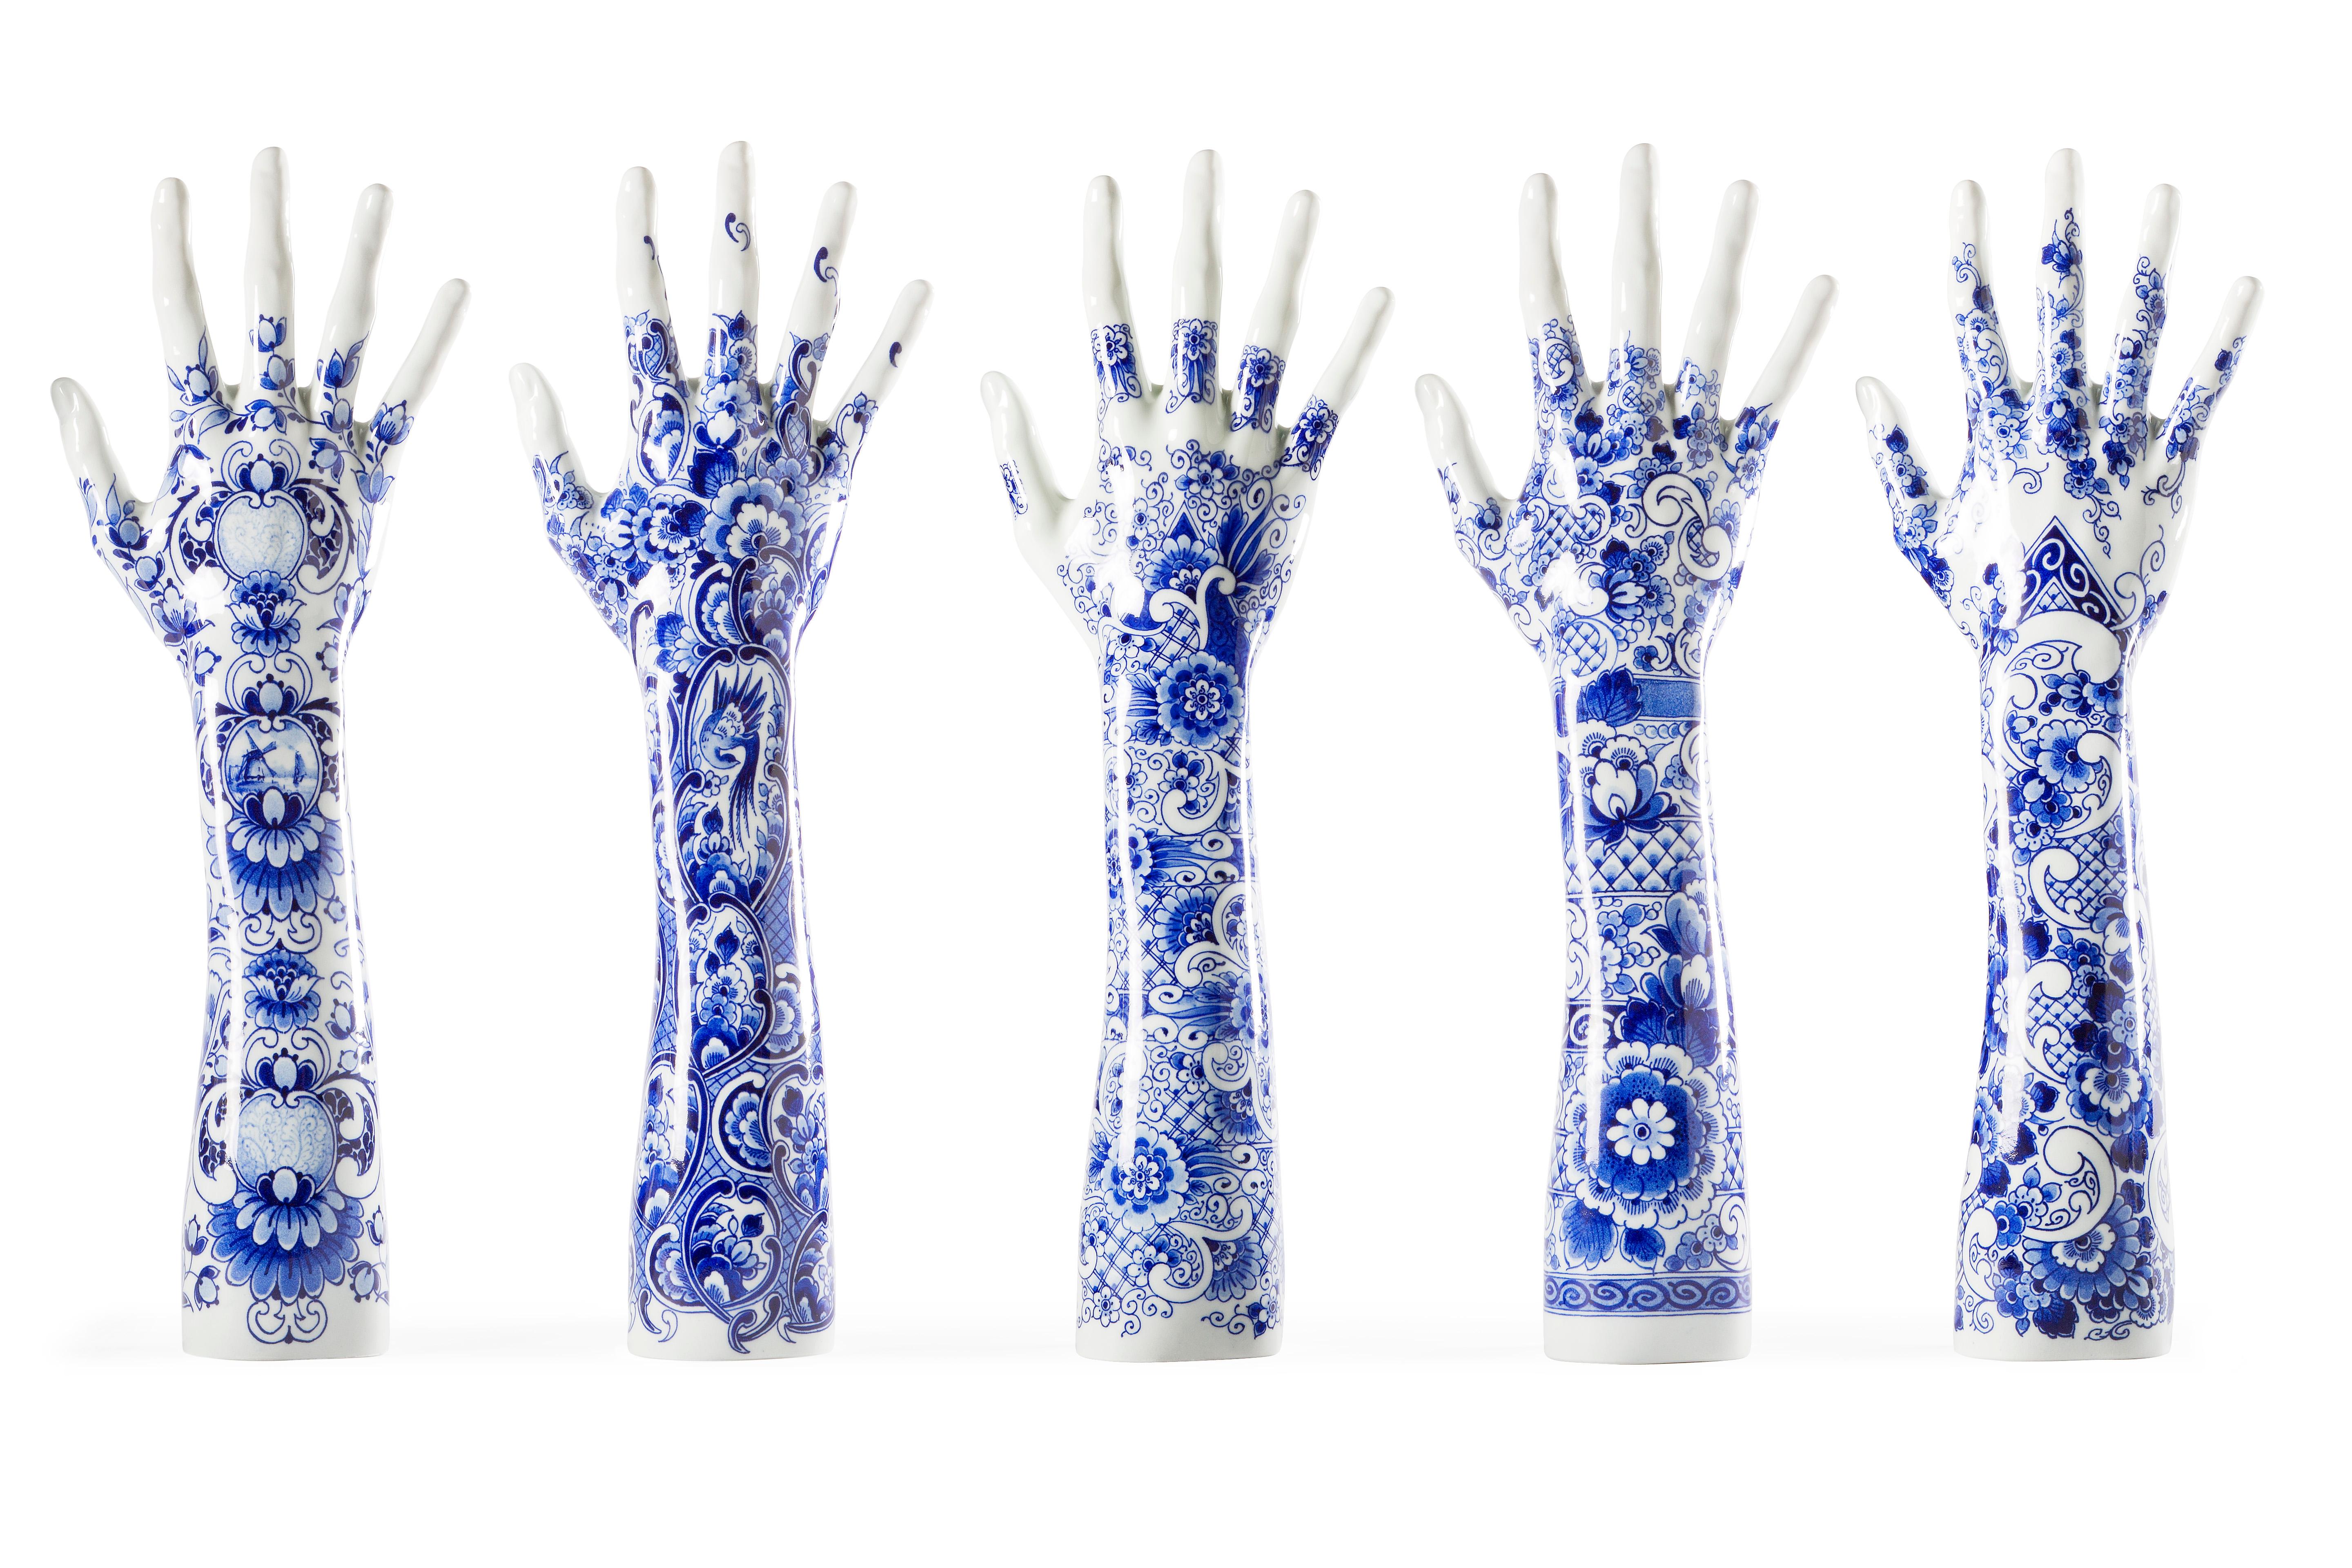 Fragile Fingers on a Grand Piano, by Marcel Wanders, 2013, Unique, Pair #3/6 1